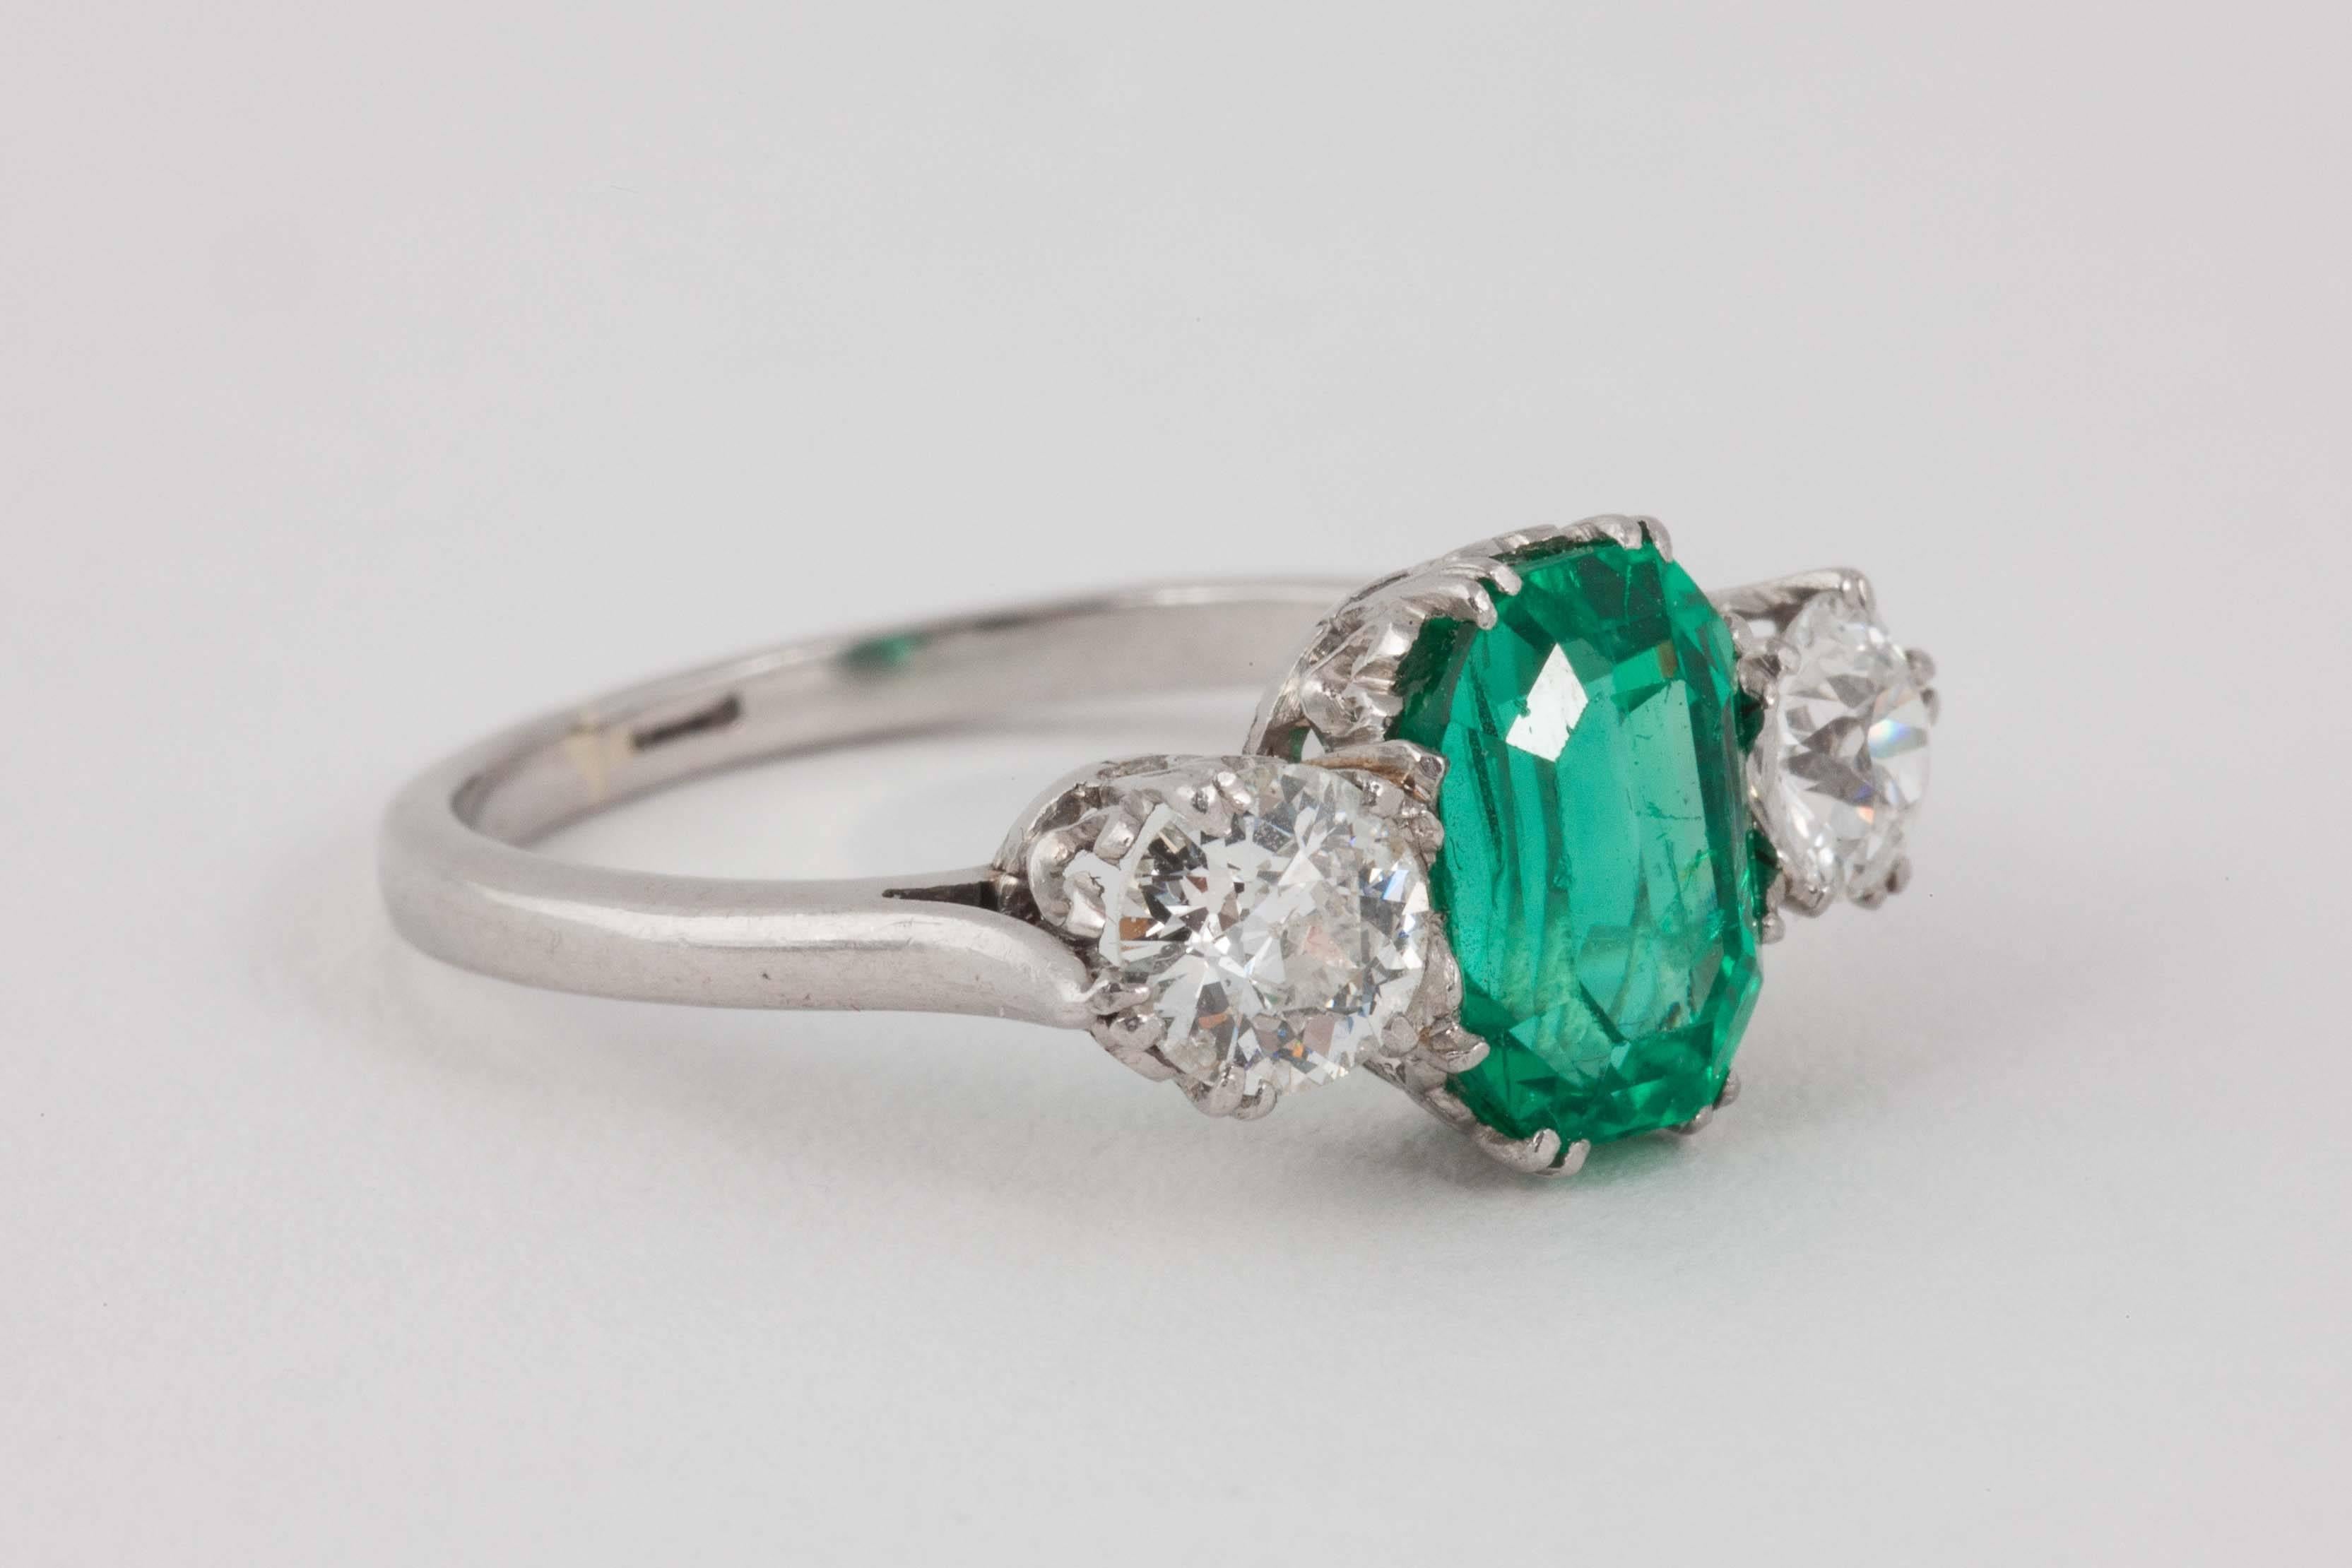 Platinum set 3 stone ring . Centre Emerald approx 2.5 cats and of Russian origin set between 2 Diamonds
Finger size N 1/2